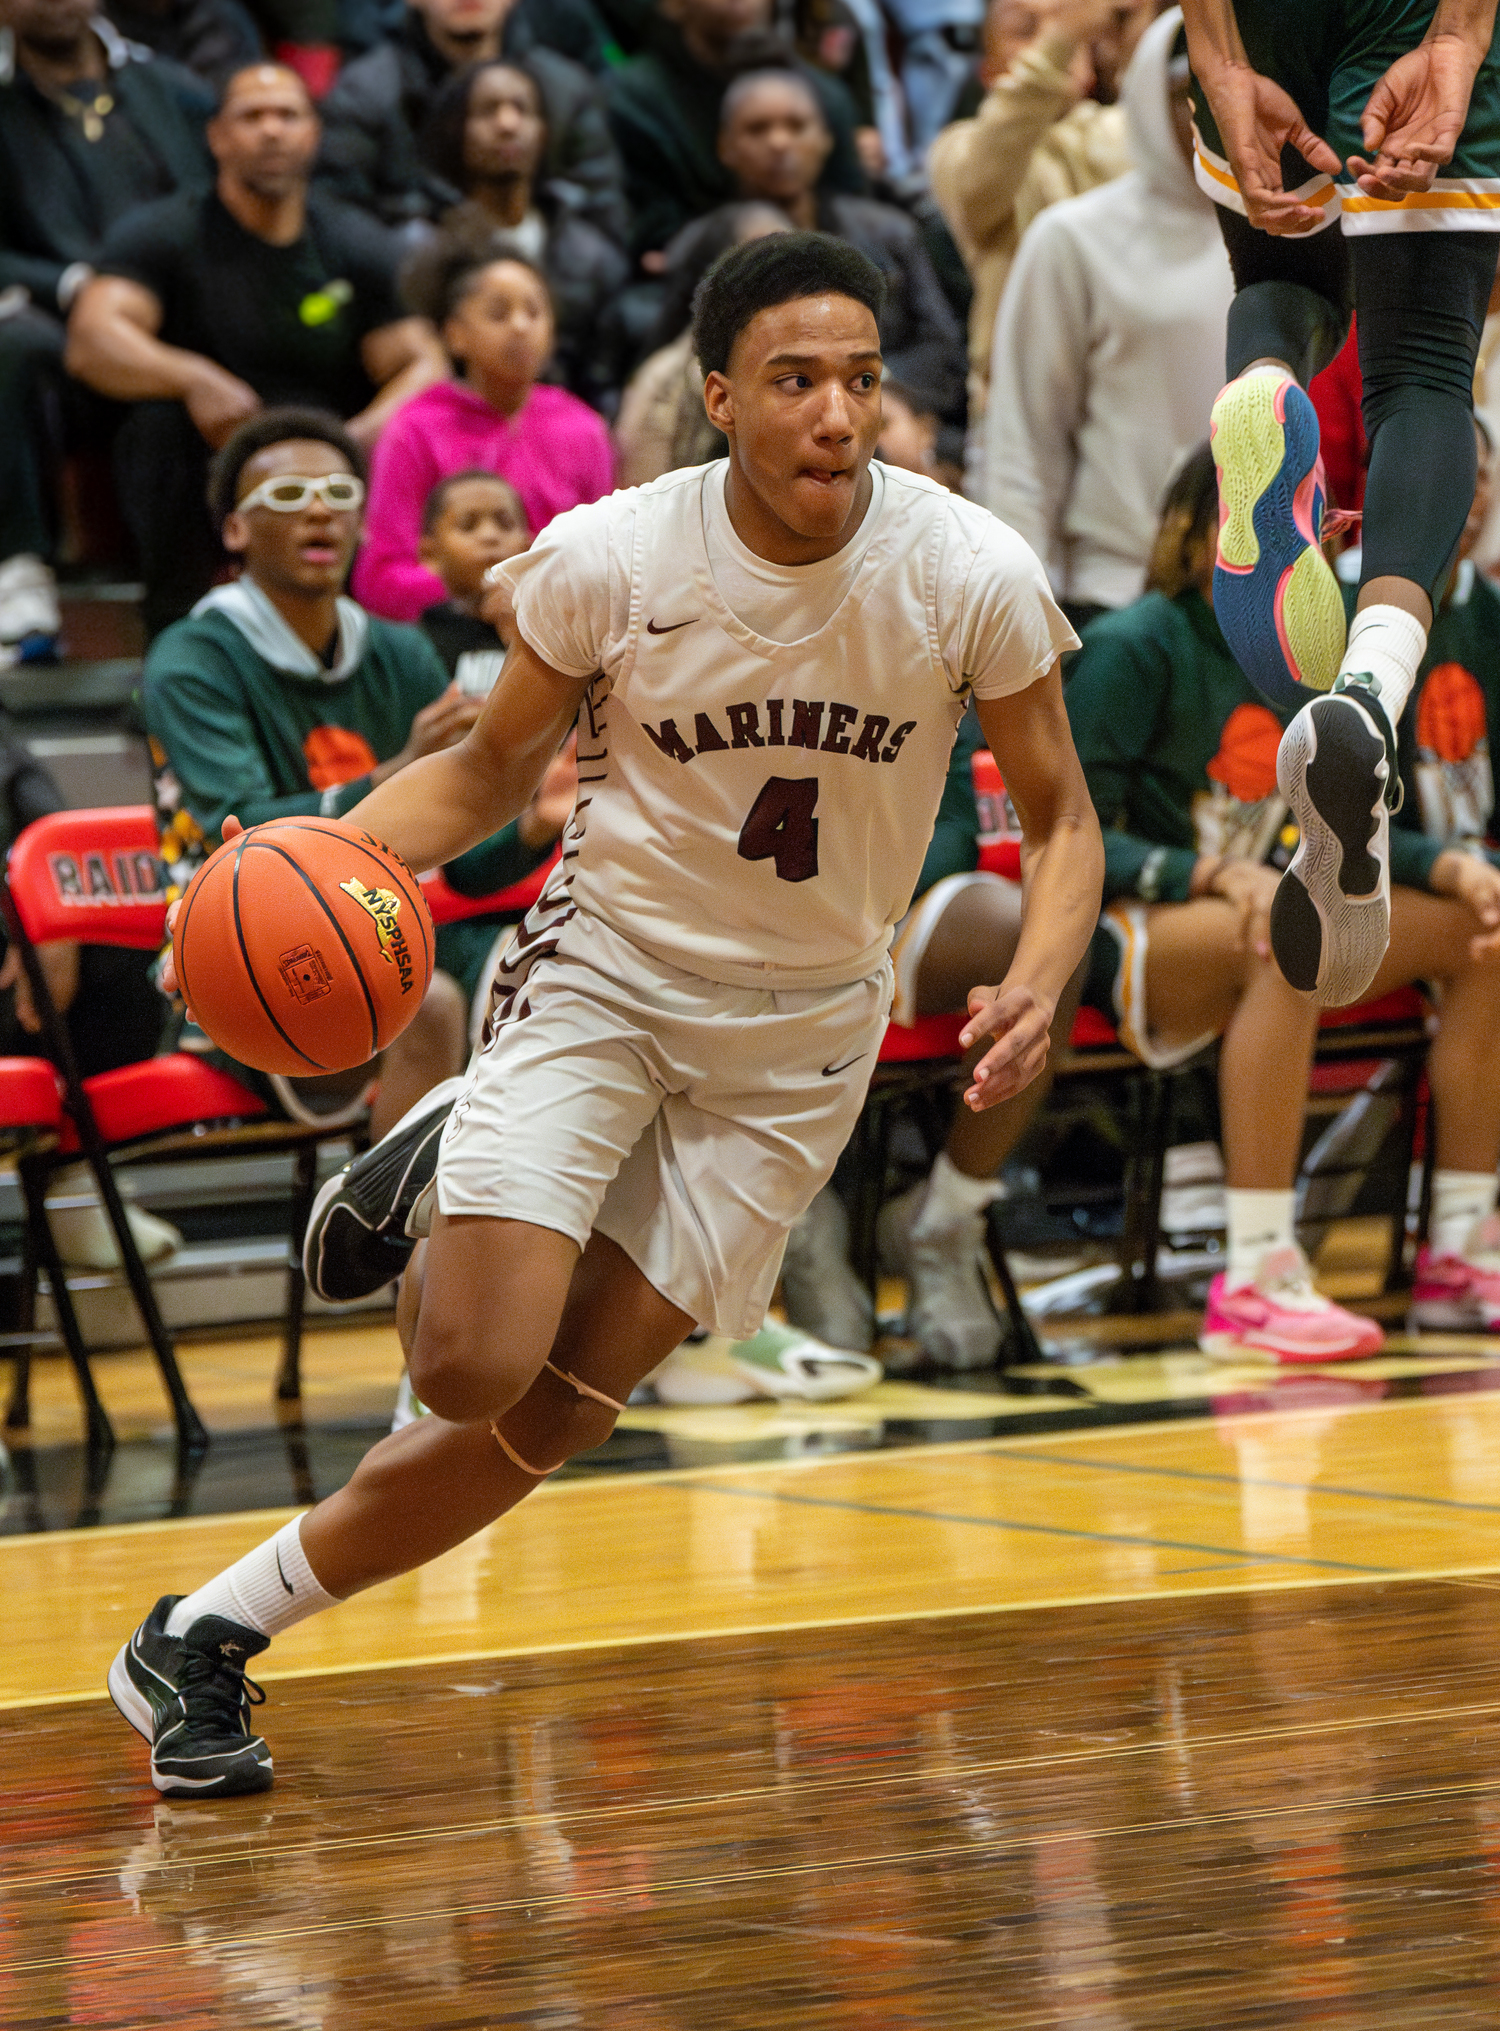 Southampton junior Davon Palmore only scored five points on Tuesday night but each point was critical in the Mariners' 70-65 victory.  RON ESPOSITO